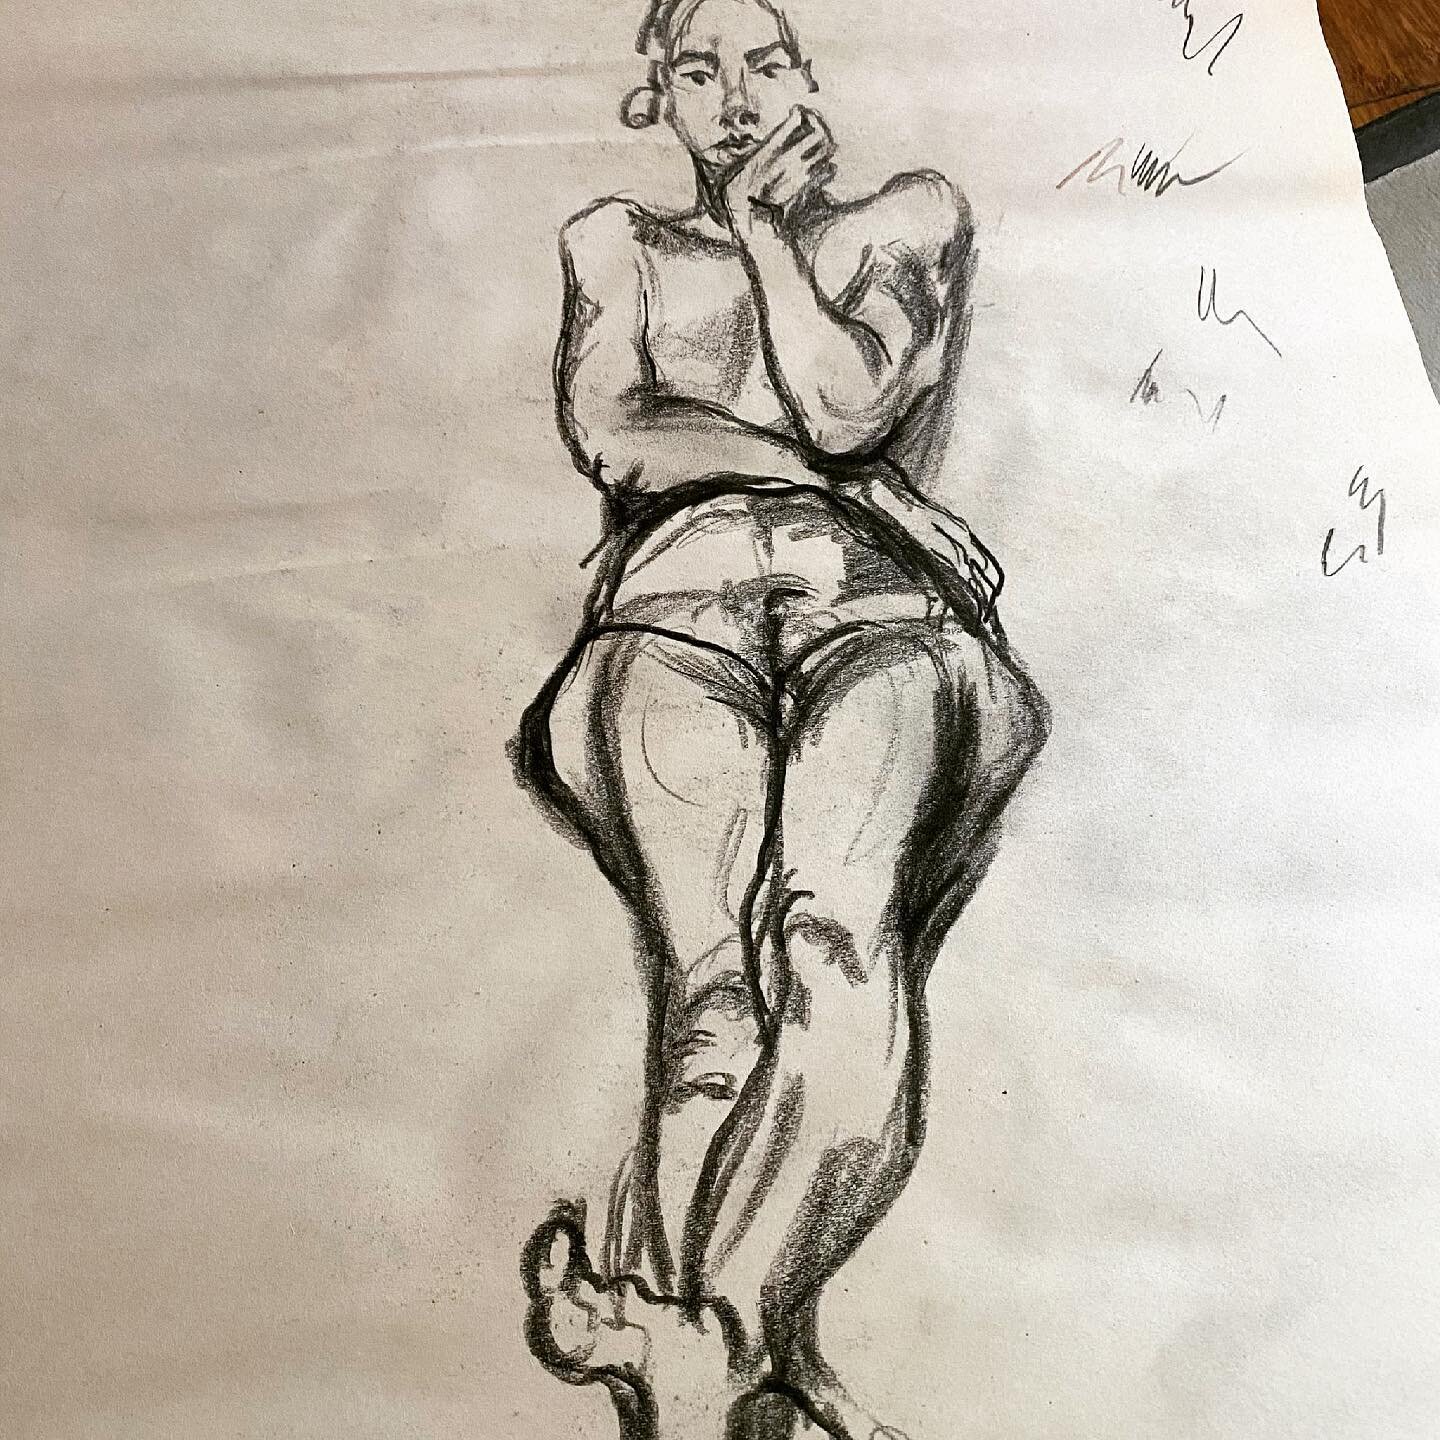 Bored with this &ldquo;sterile new world&rdquo;...missing open no instruction life drawing class🐒 Timed 10 min drawings 
.
.
.
.
#lifedrawingmodel #lifedrawingsession #charcoldrawing #arttoronto #boredinlockdown #modernartist #drawingoftheday #drawi